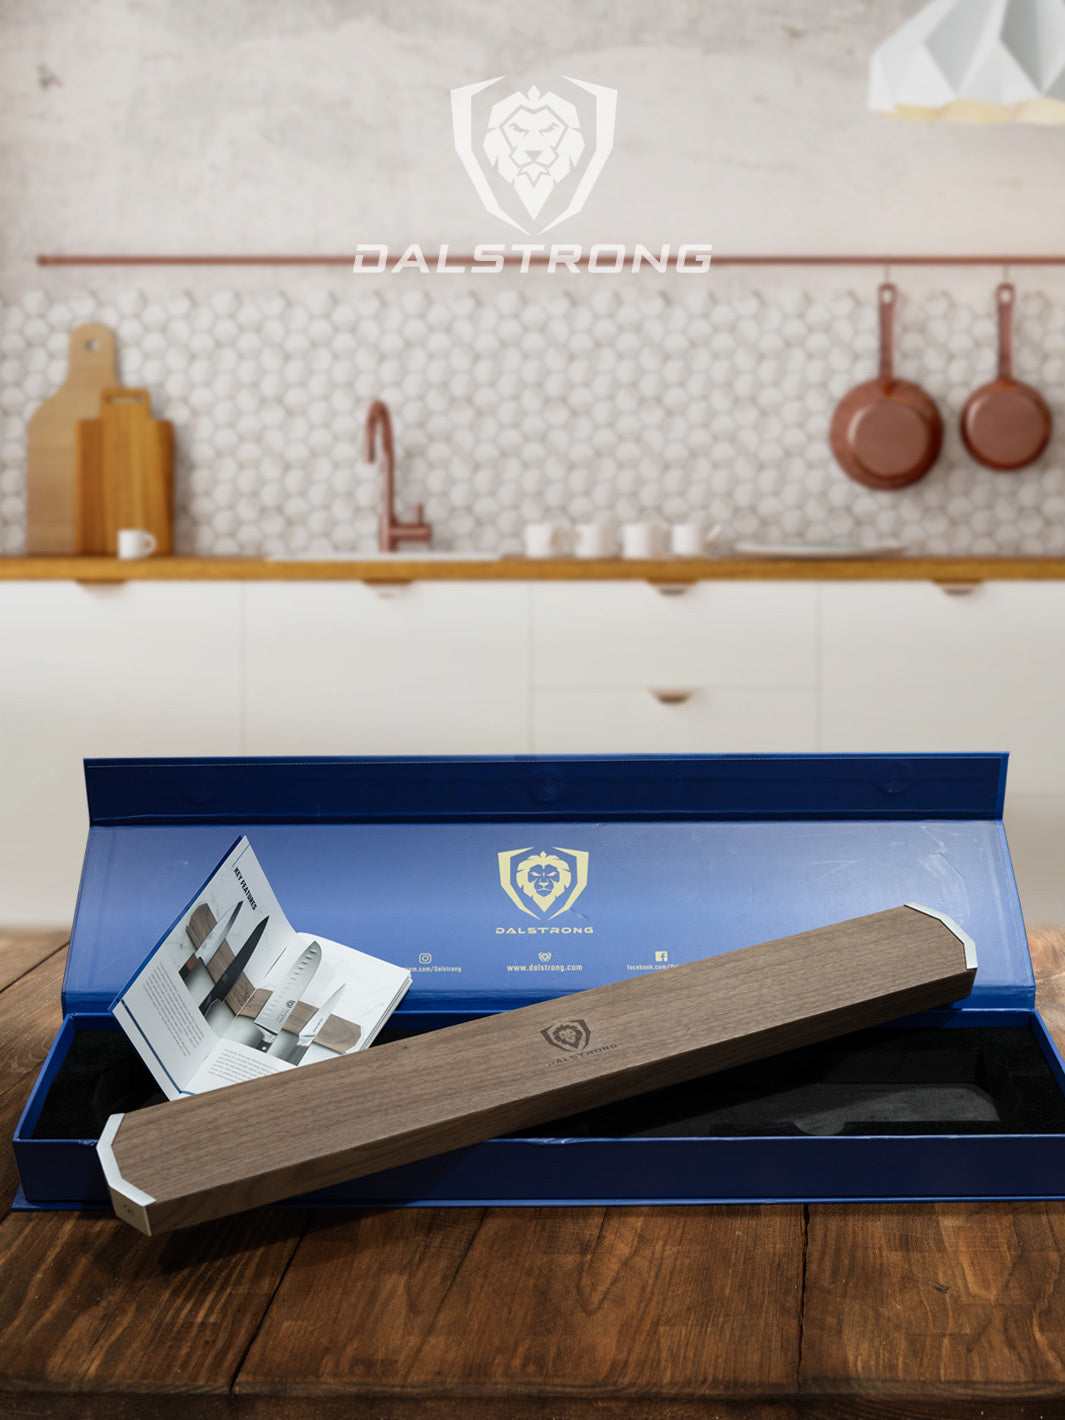 Dalstrong magnetic bar walnut wall knife holder outside it's premium packaging.